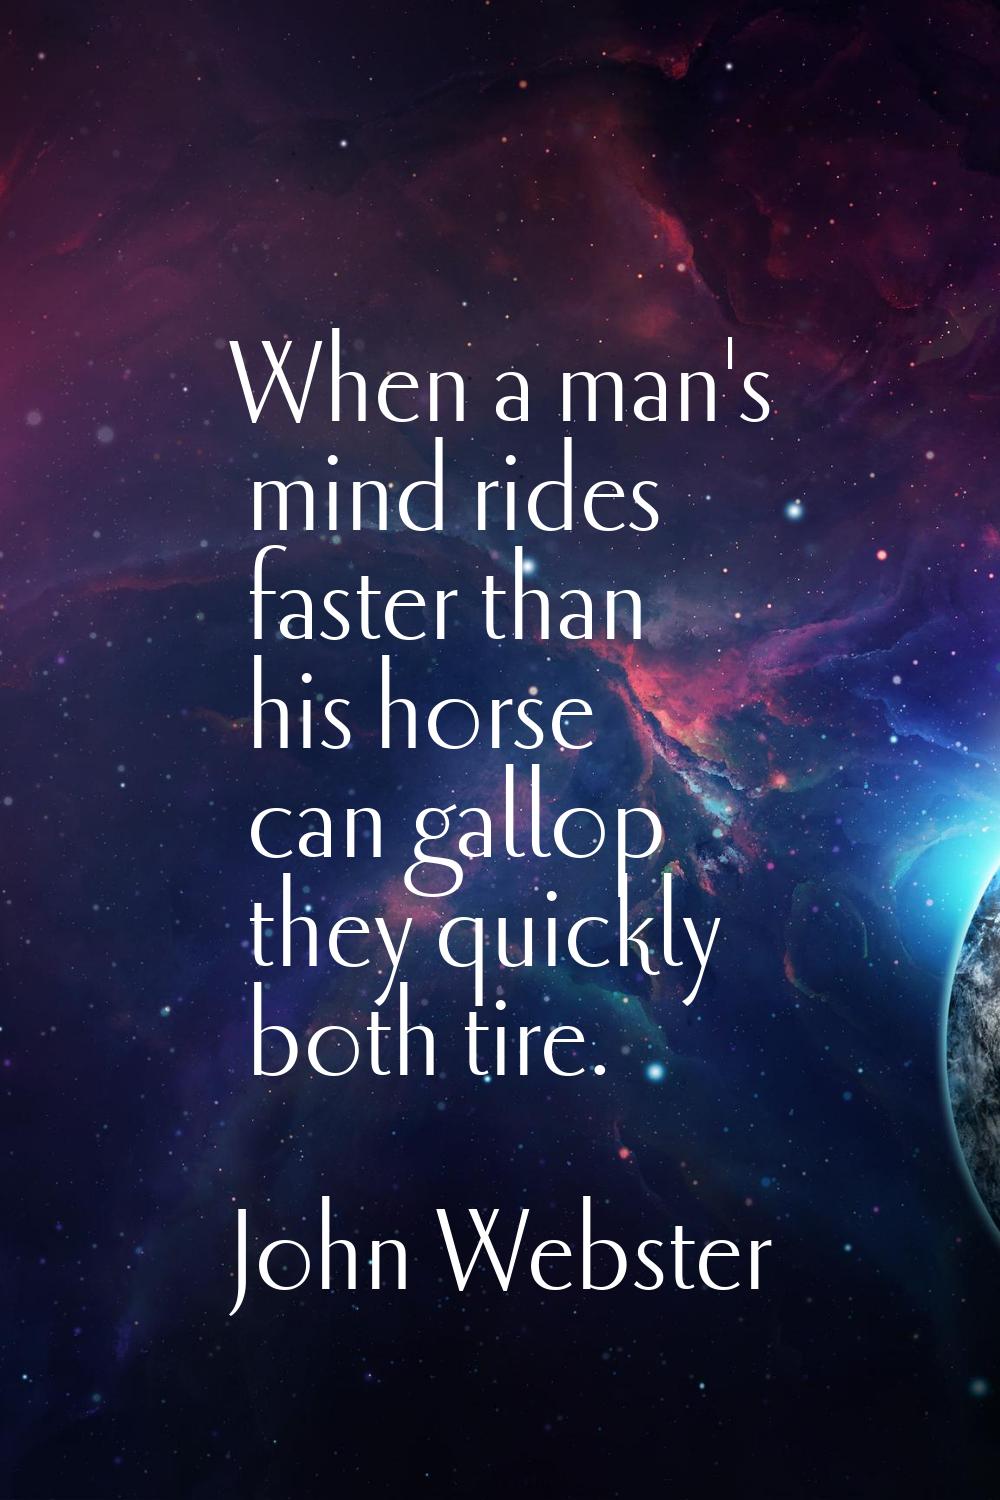 When a man's mind rides faster than his horse can gallop they quickly both tire.